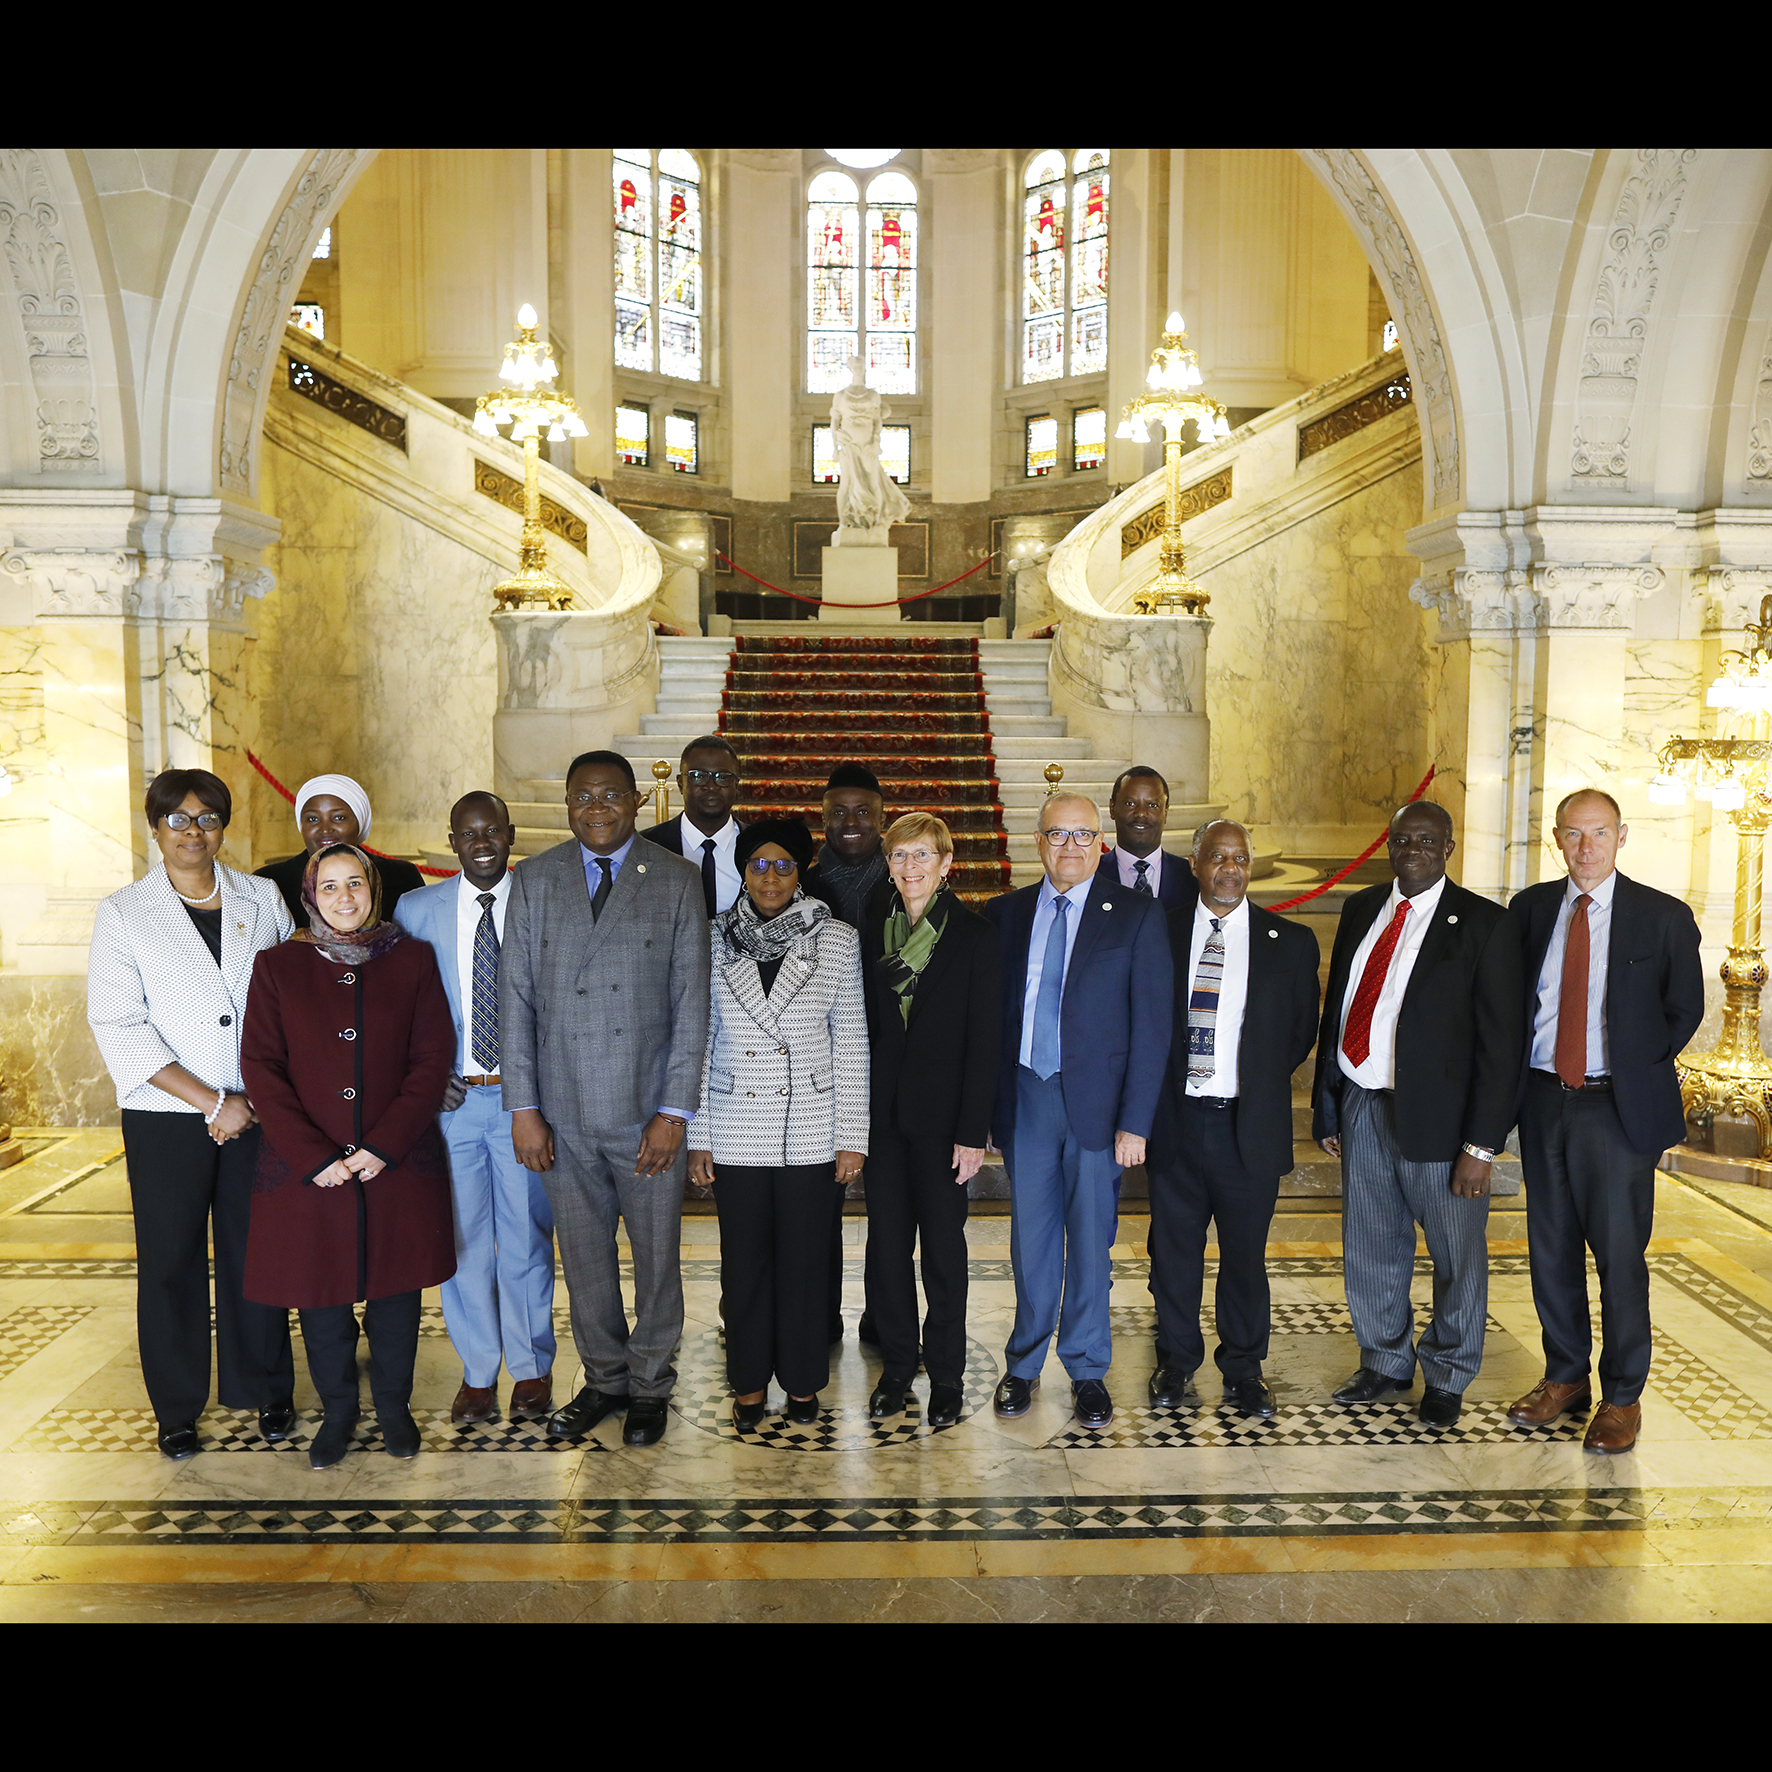 Visit of a delegation from the African Court on Human and Peoples’ Rights to the International Court of Justice